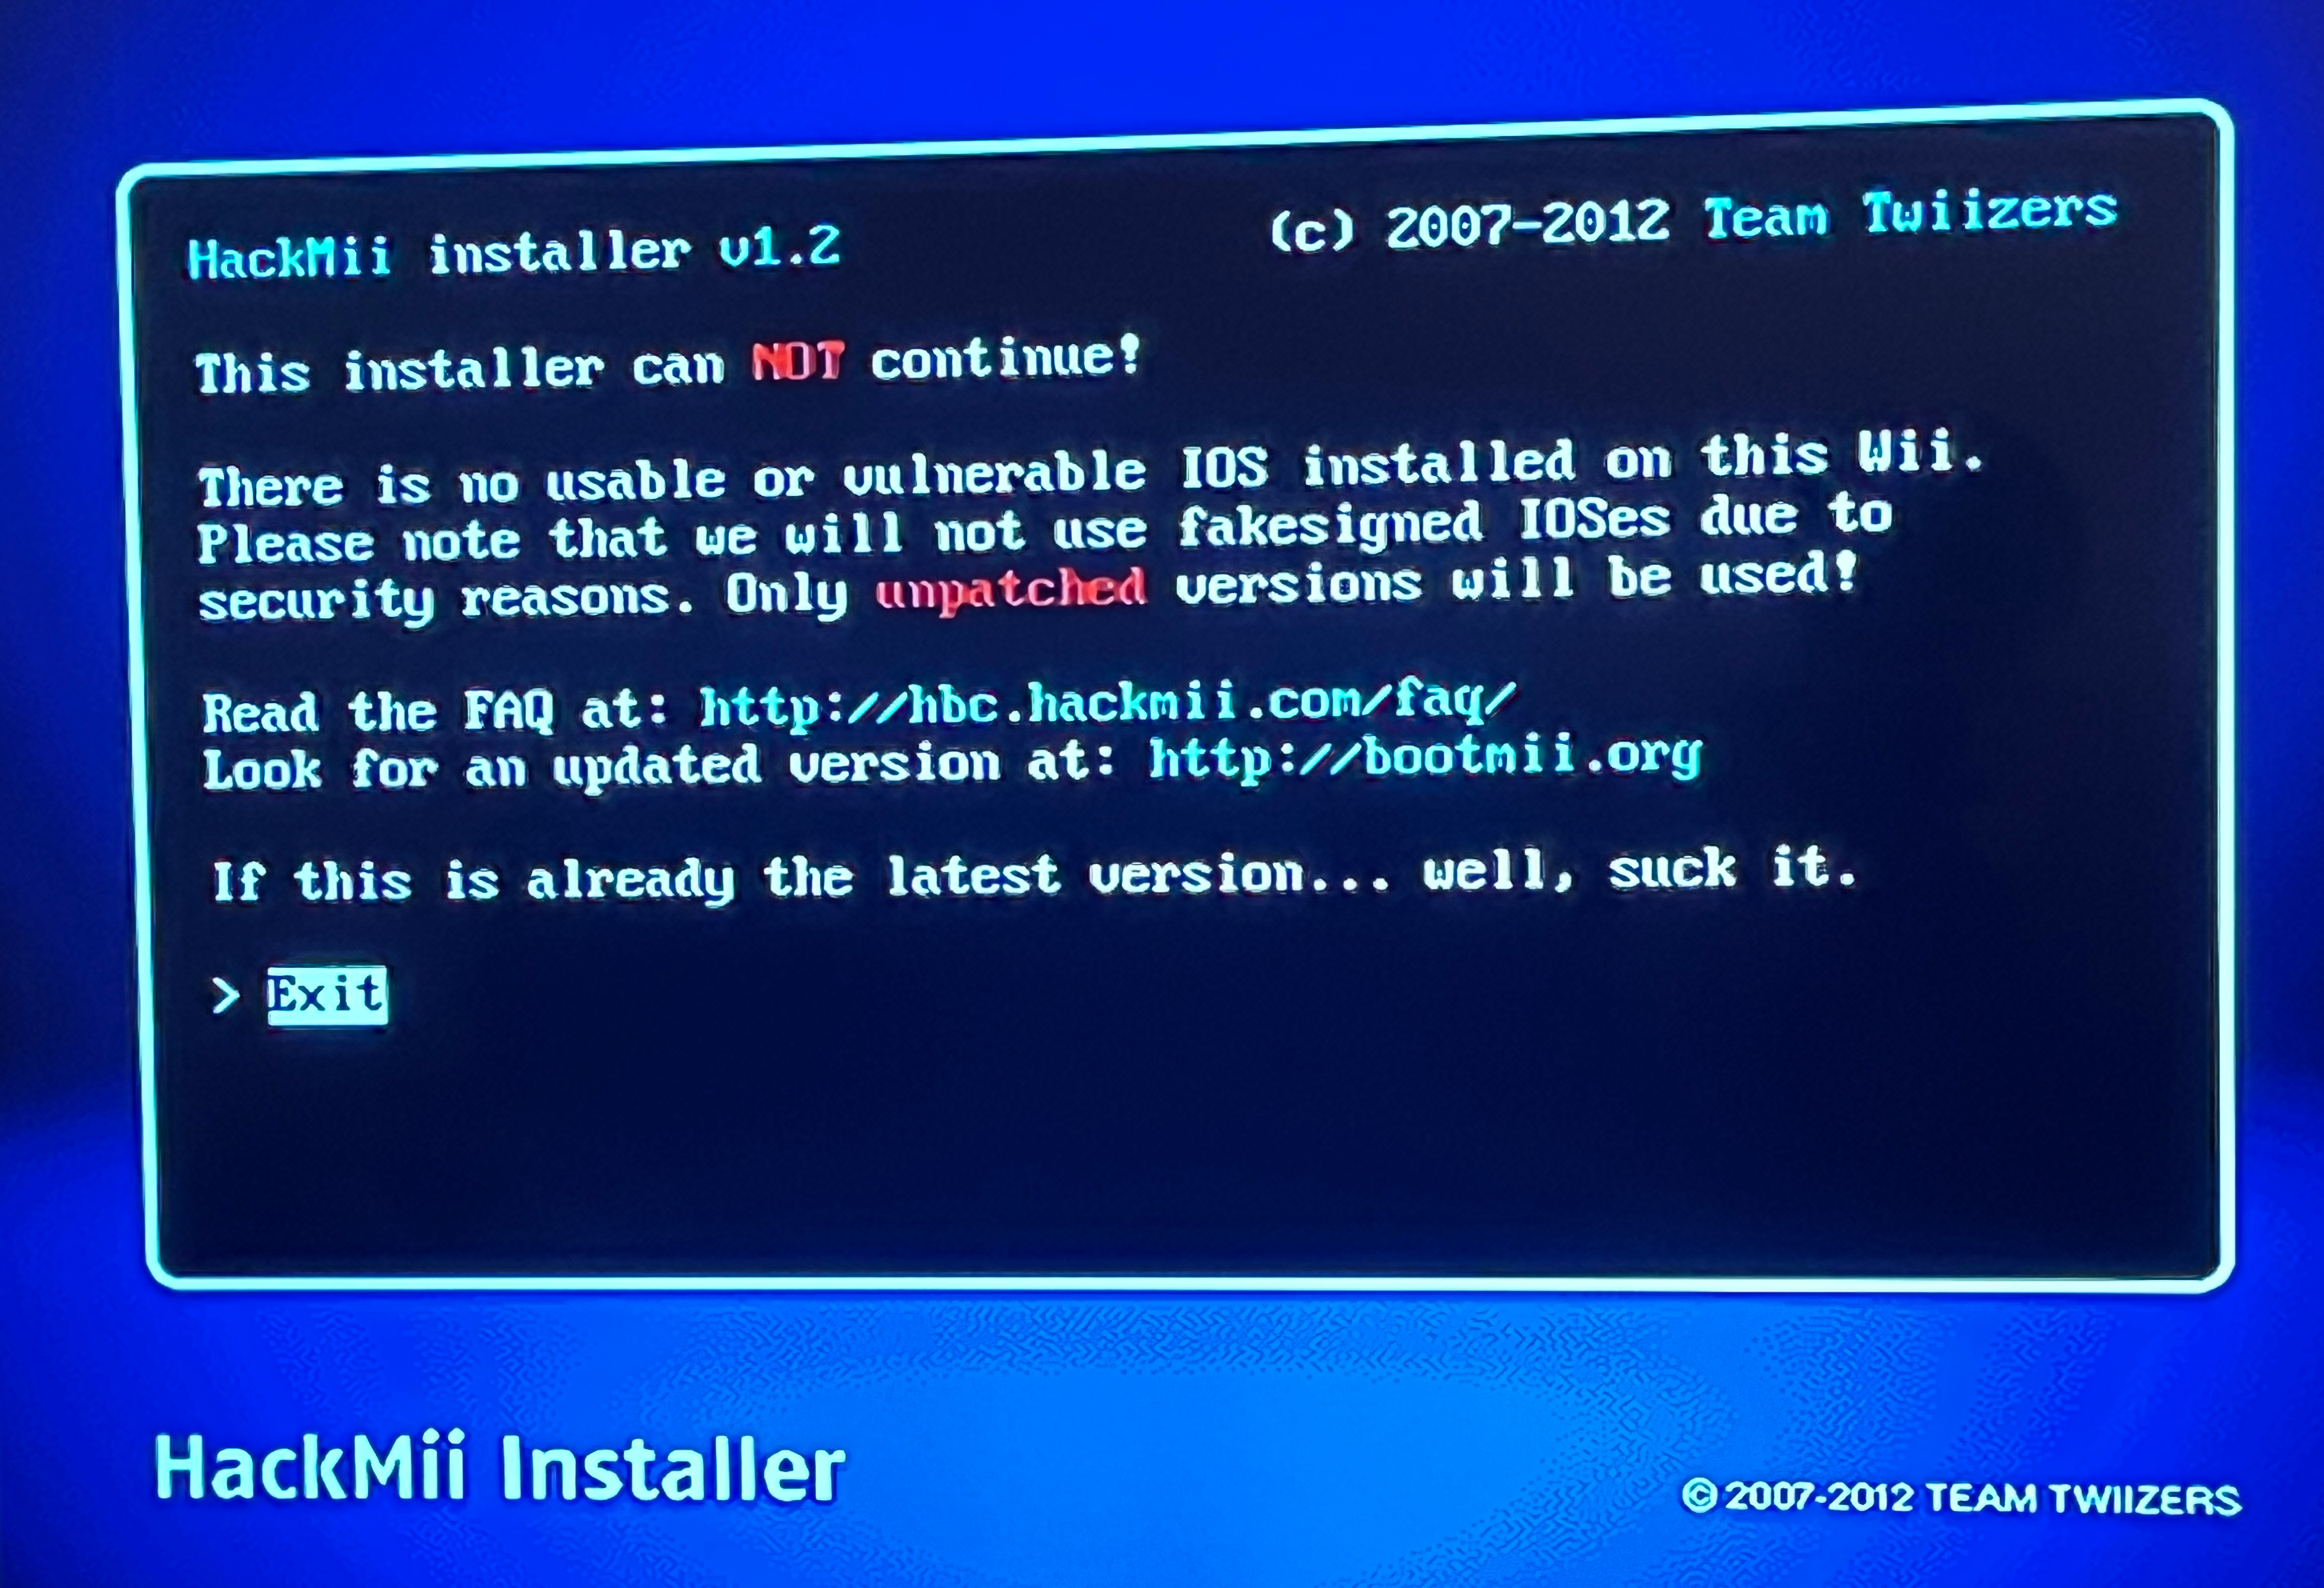 Cannot install homebrew : "this installer can NOT continue!" | GBAtemp.net  - The Independent Video Game Community